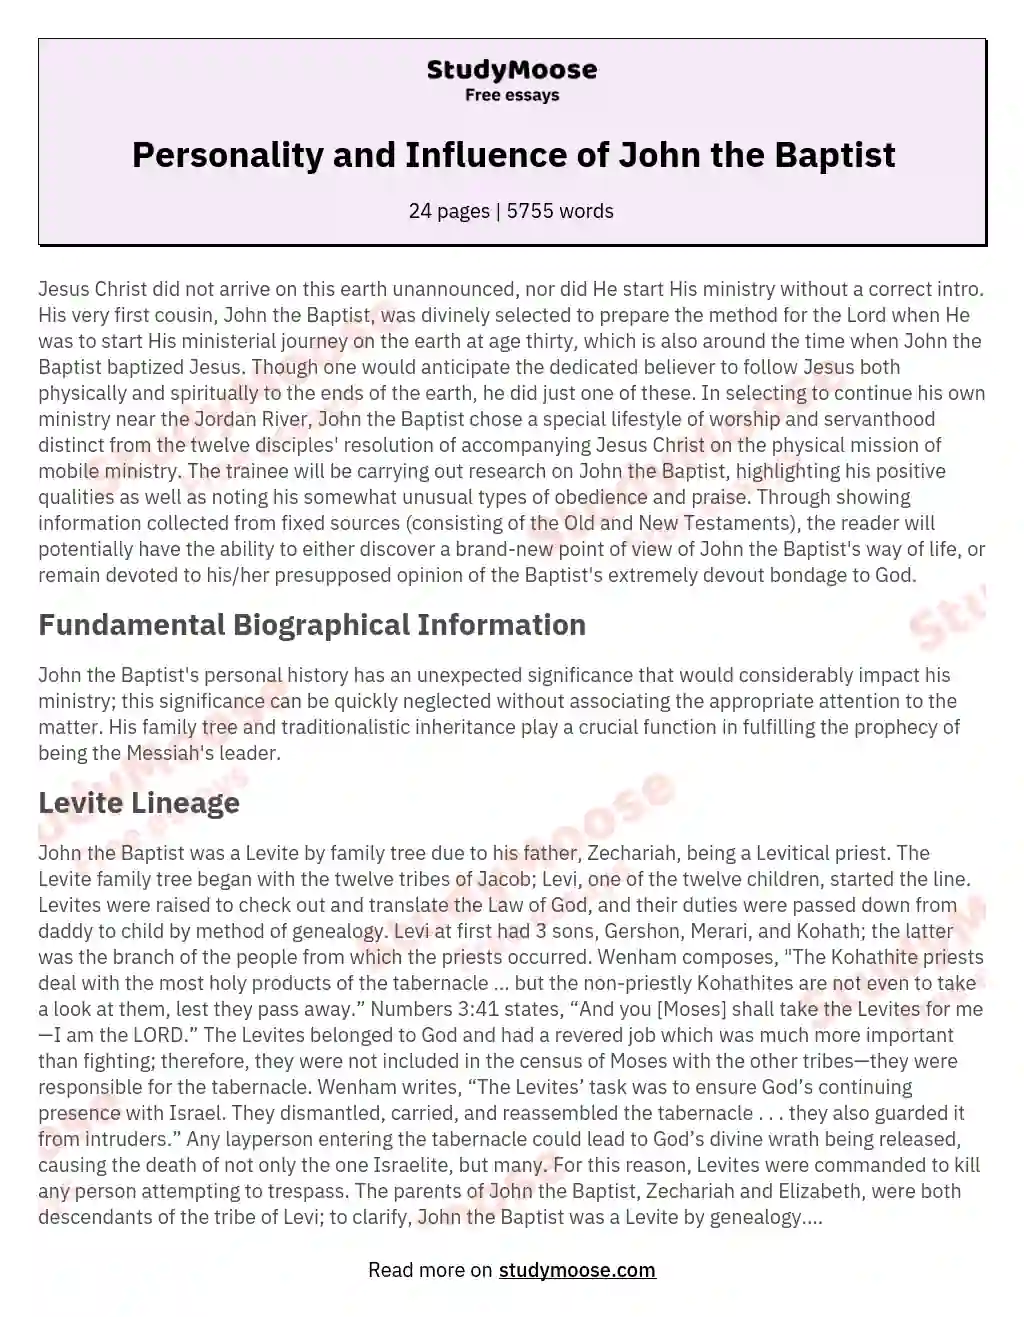 Personality and Influence of John the Baptist essay